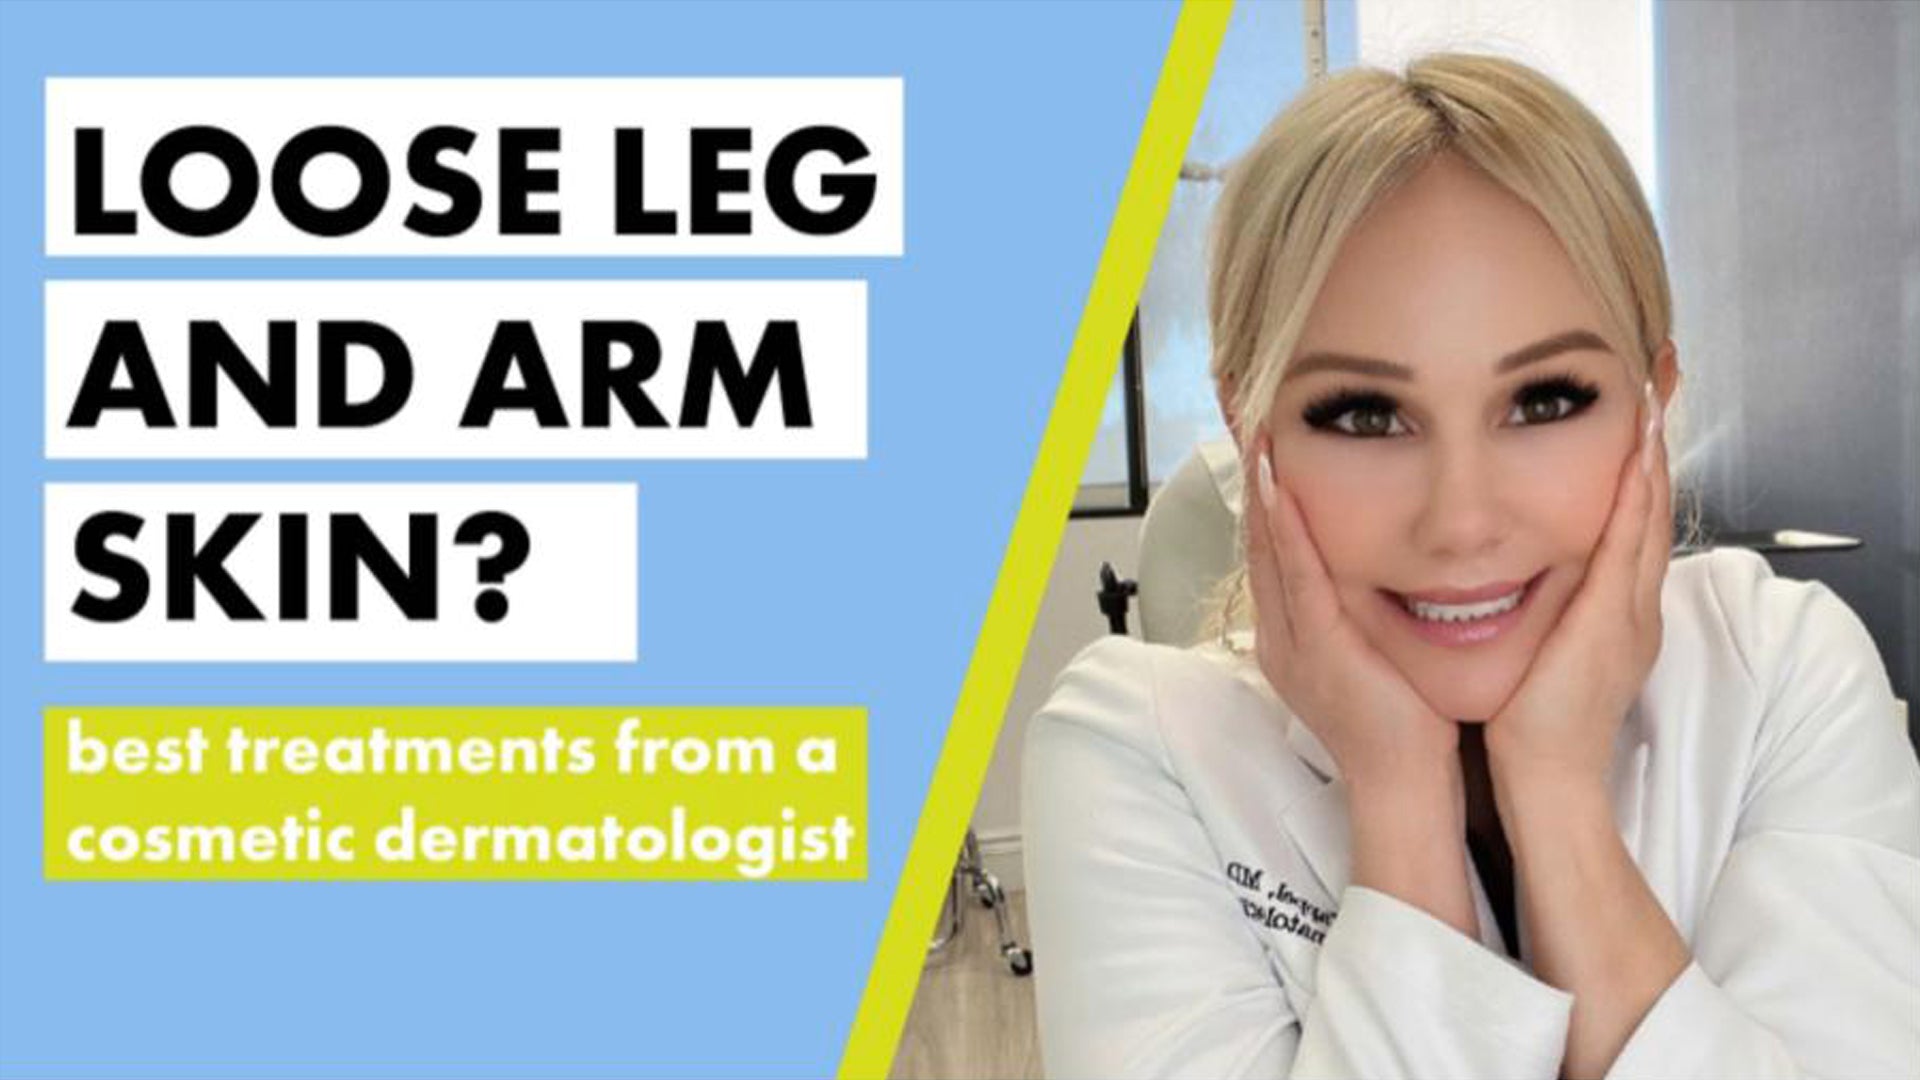 Loose skin on your legs and arms? Here’s how to treat it!